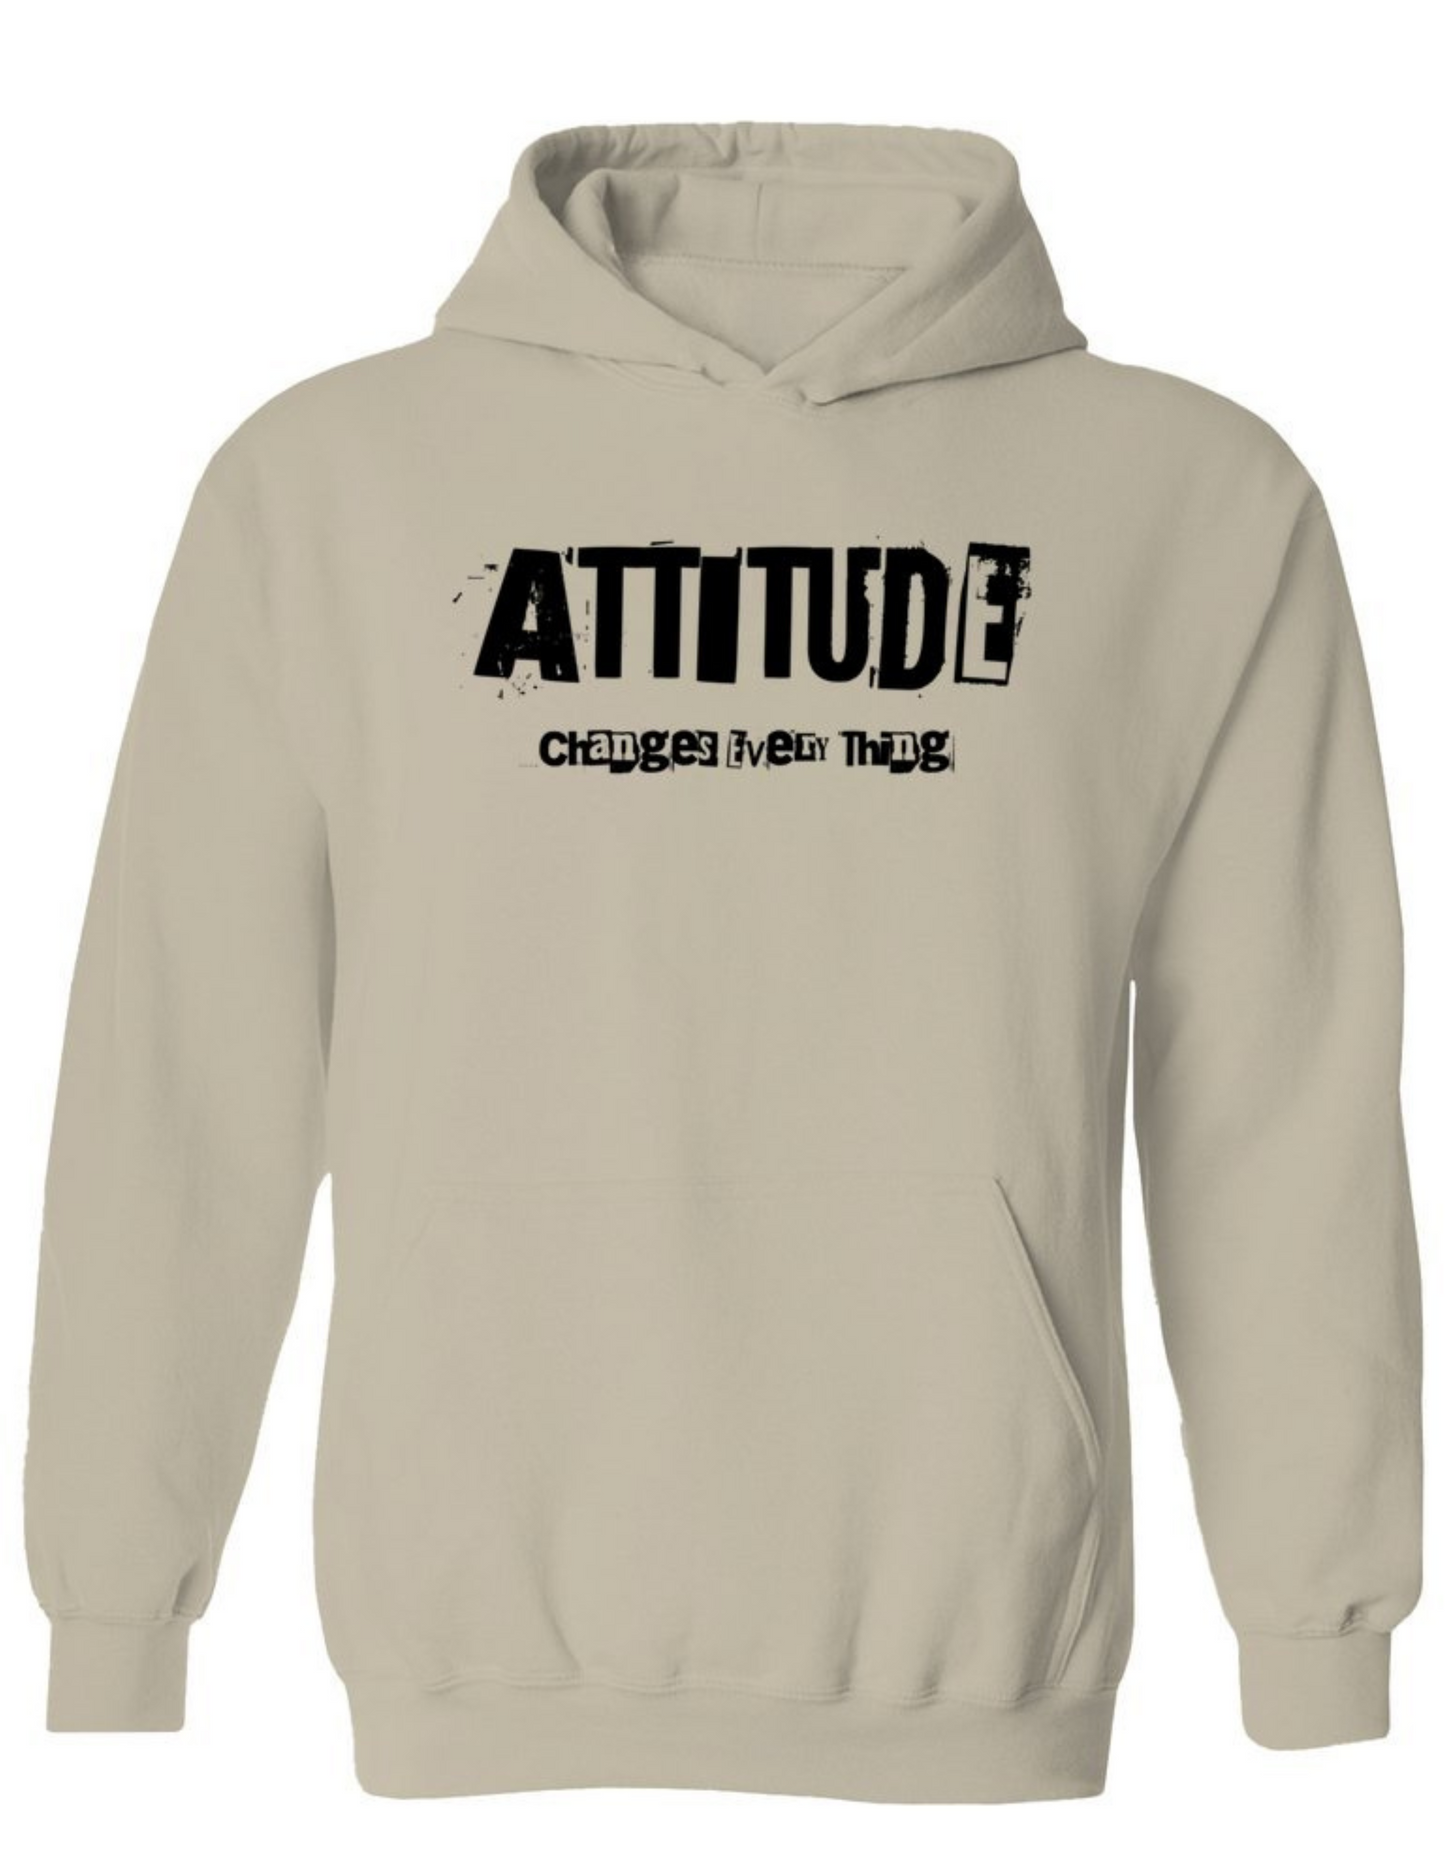 Hoodie:Hoodie - 'Attitude Changes Everything' Hooded Sweatshirt is your go-to for comfort and warmth. Crafted from a durable cotton and polyester blend, it's both cozy and versatile with its spacious pouch pocket and matching drawstrings.Attitude changes everything